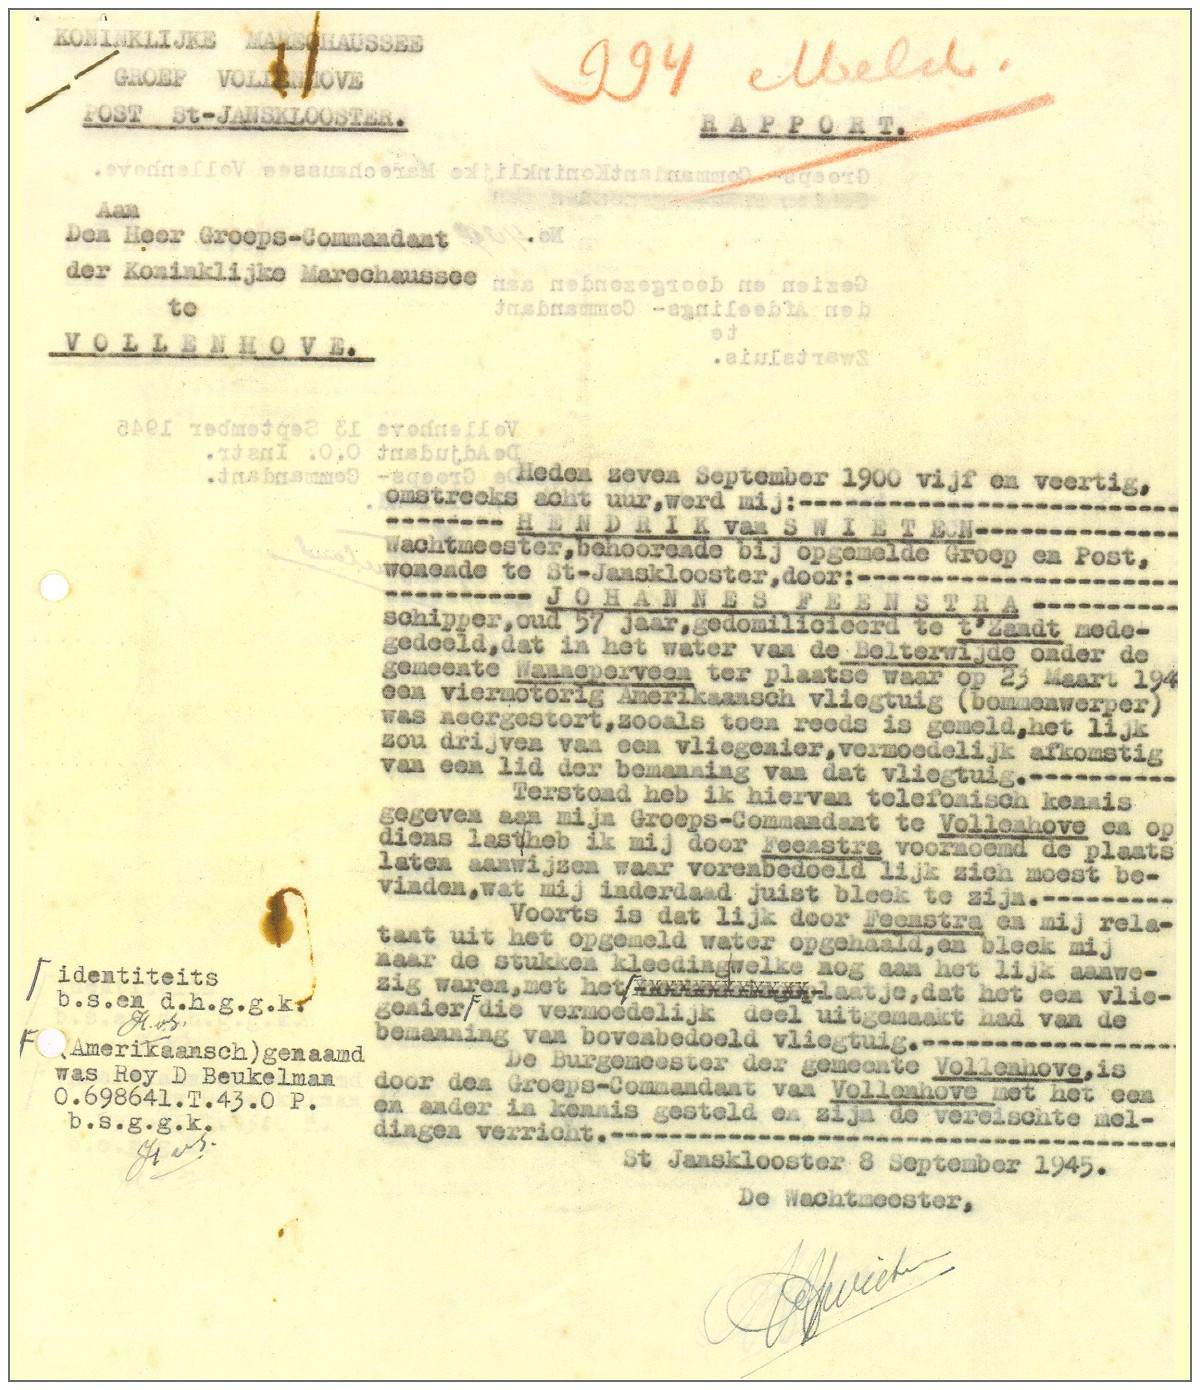 Police report - finding of floating corps 'Beukelman' in lake - 07 Sep 1945